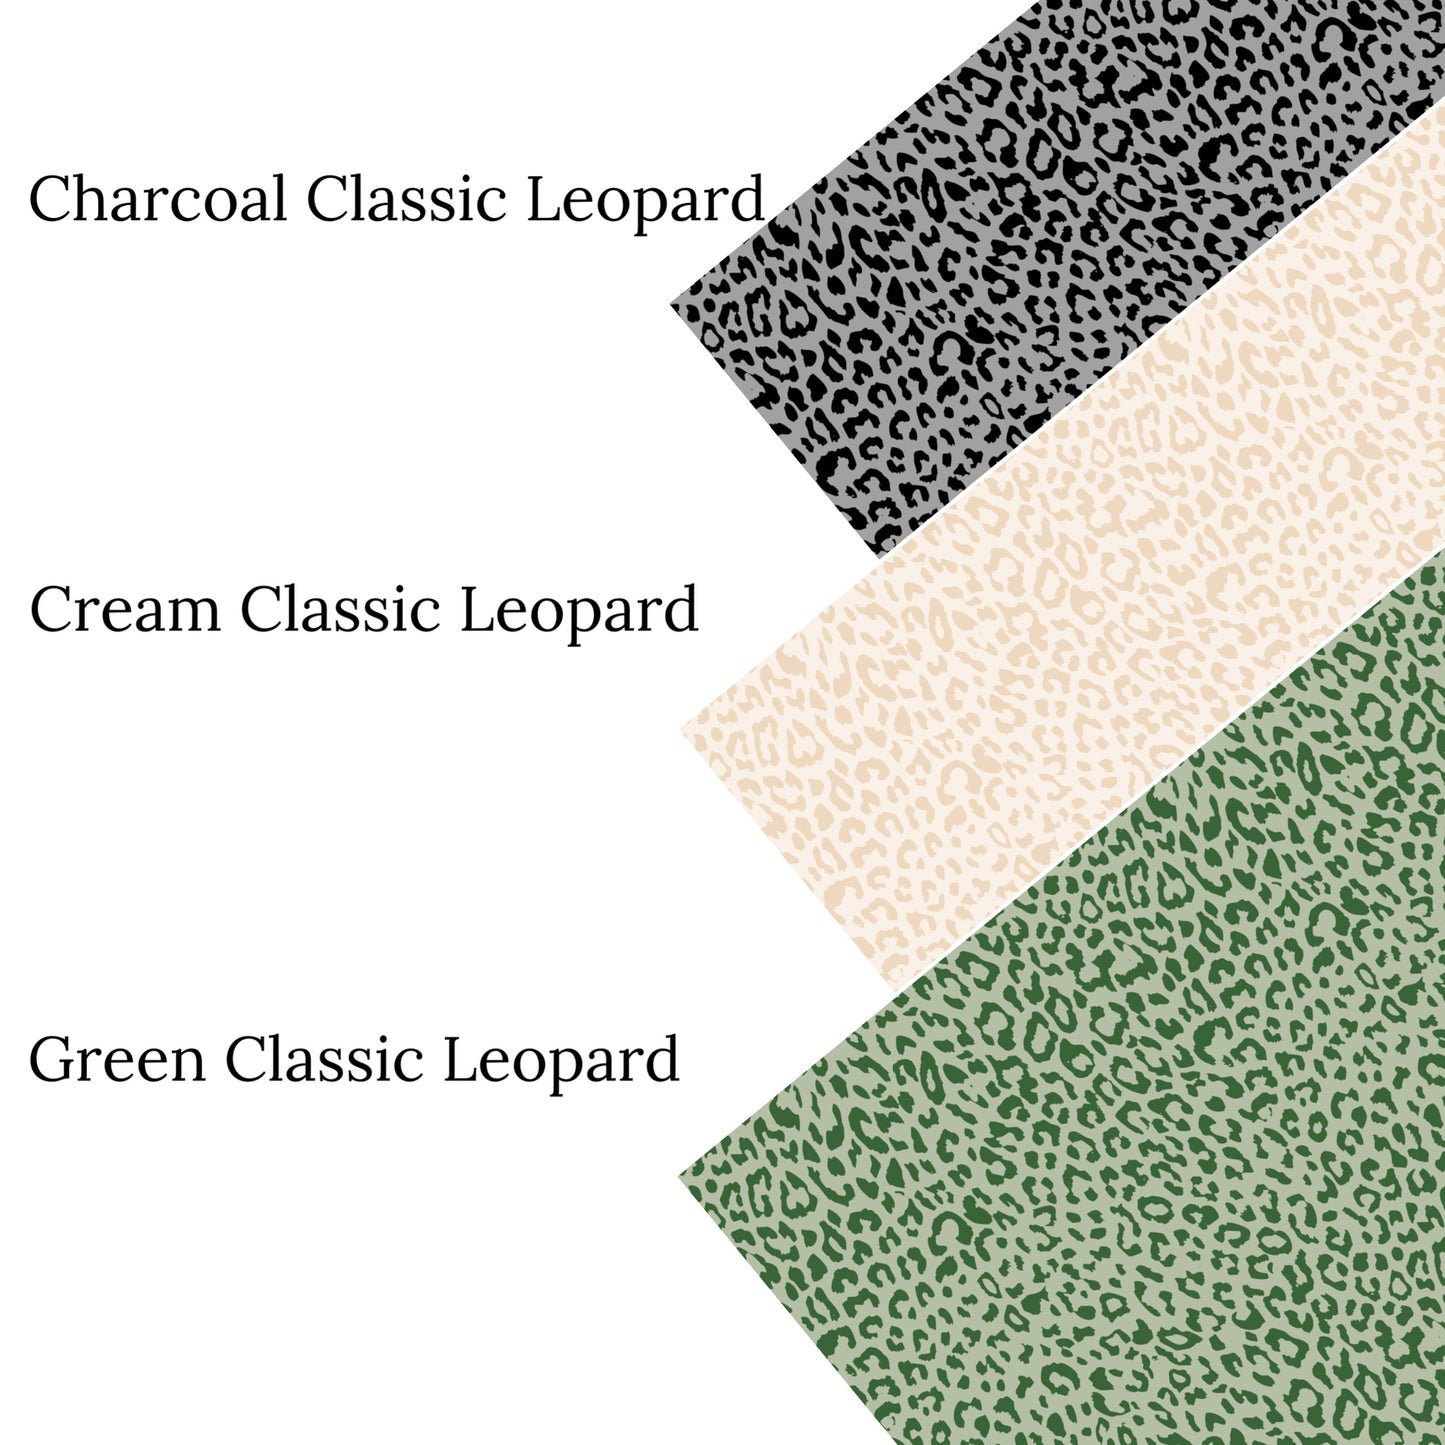 Green Classic Leopard Faux Leather Sheets